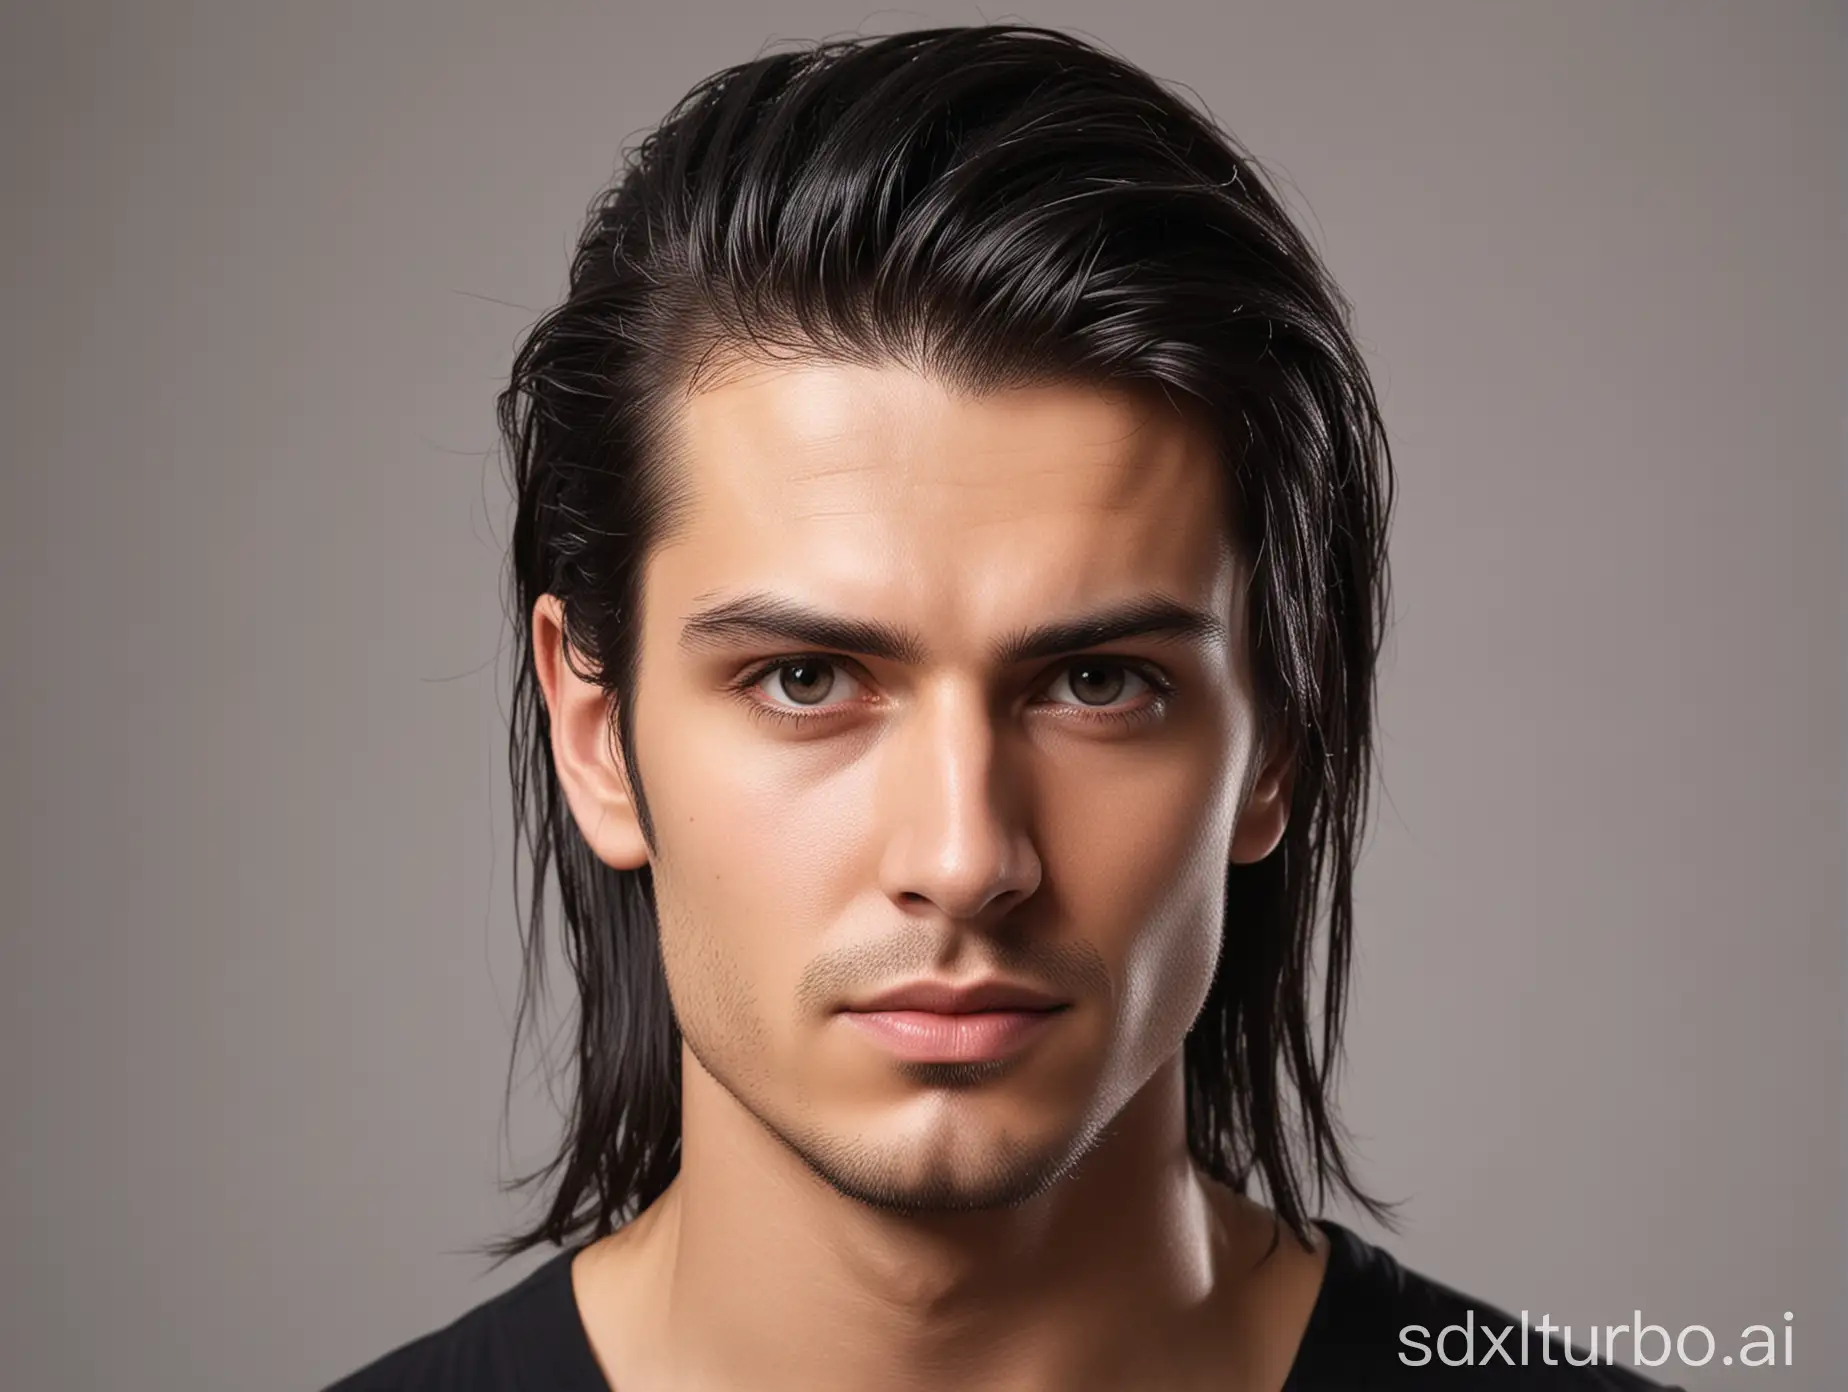 male hair pulle back, shiny, black, long hair, pulled back, front angle, looking straight to camera